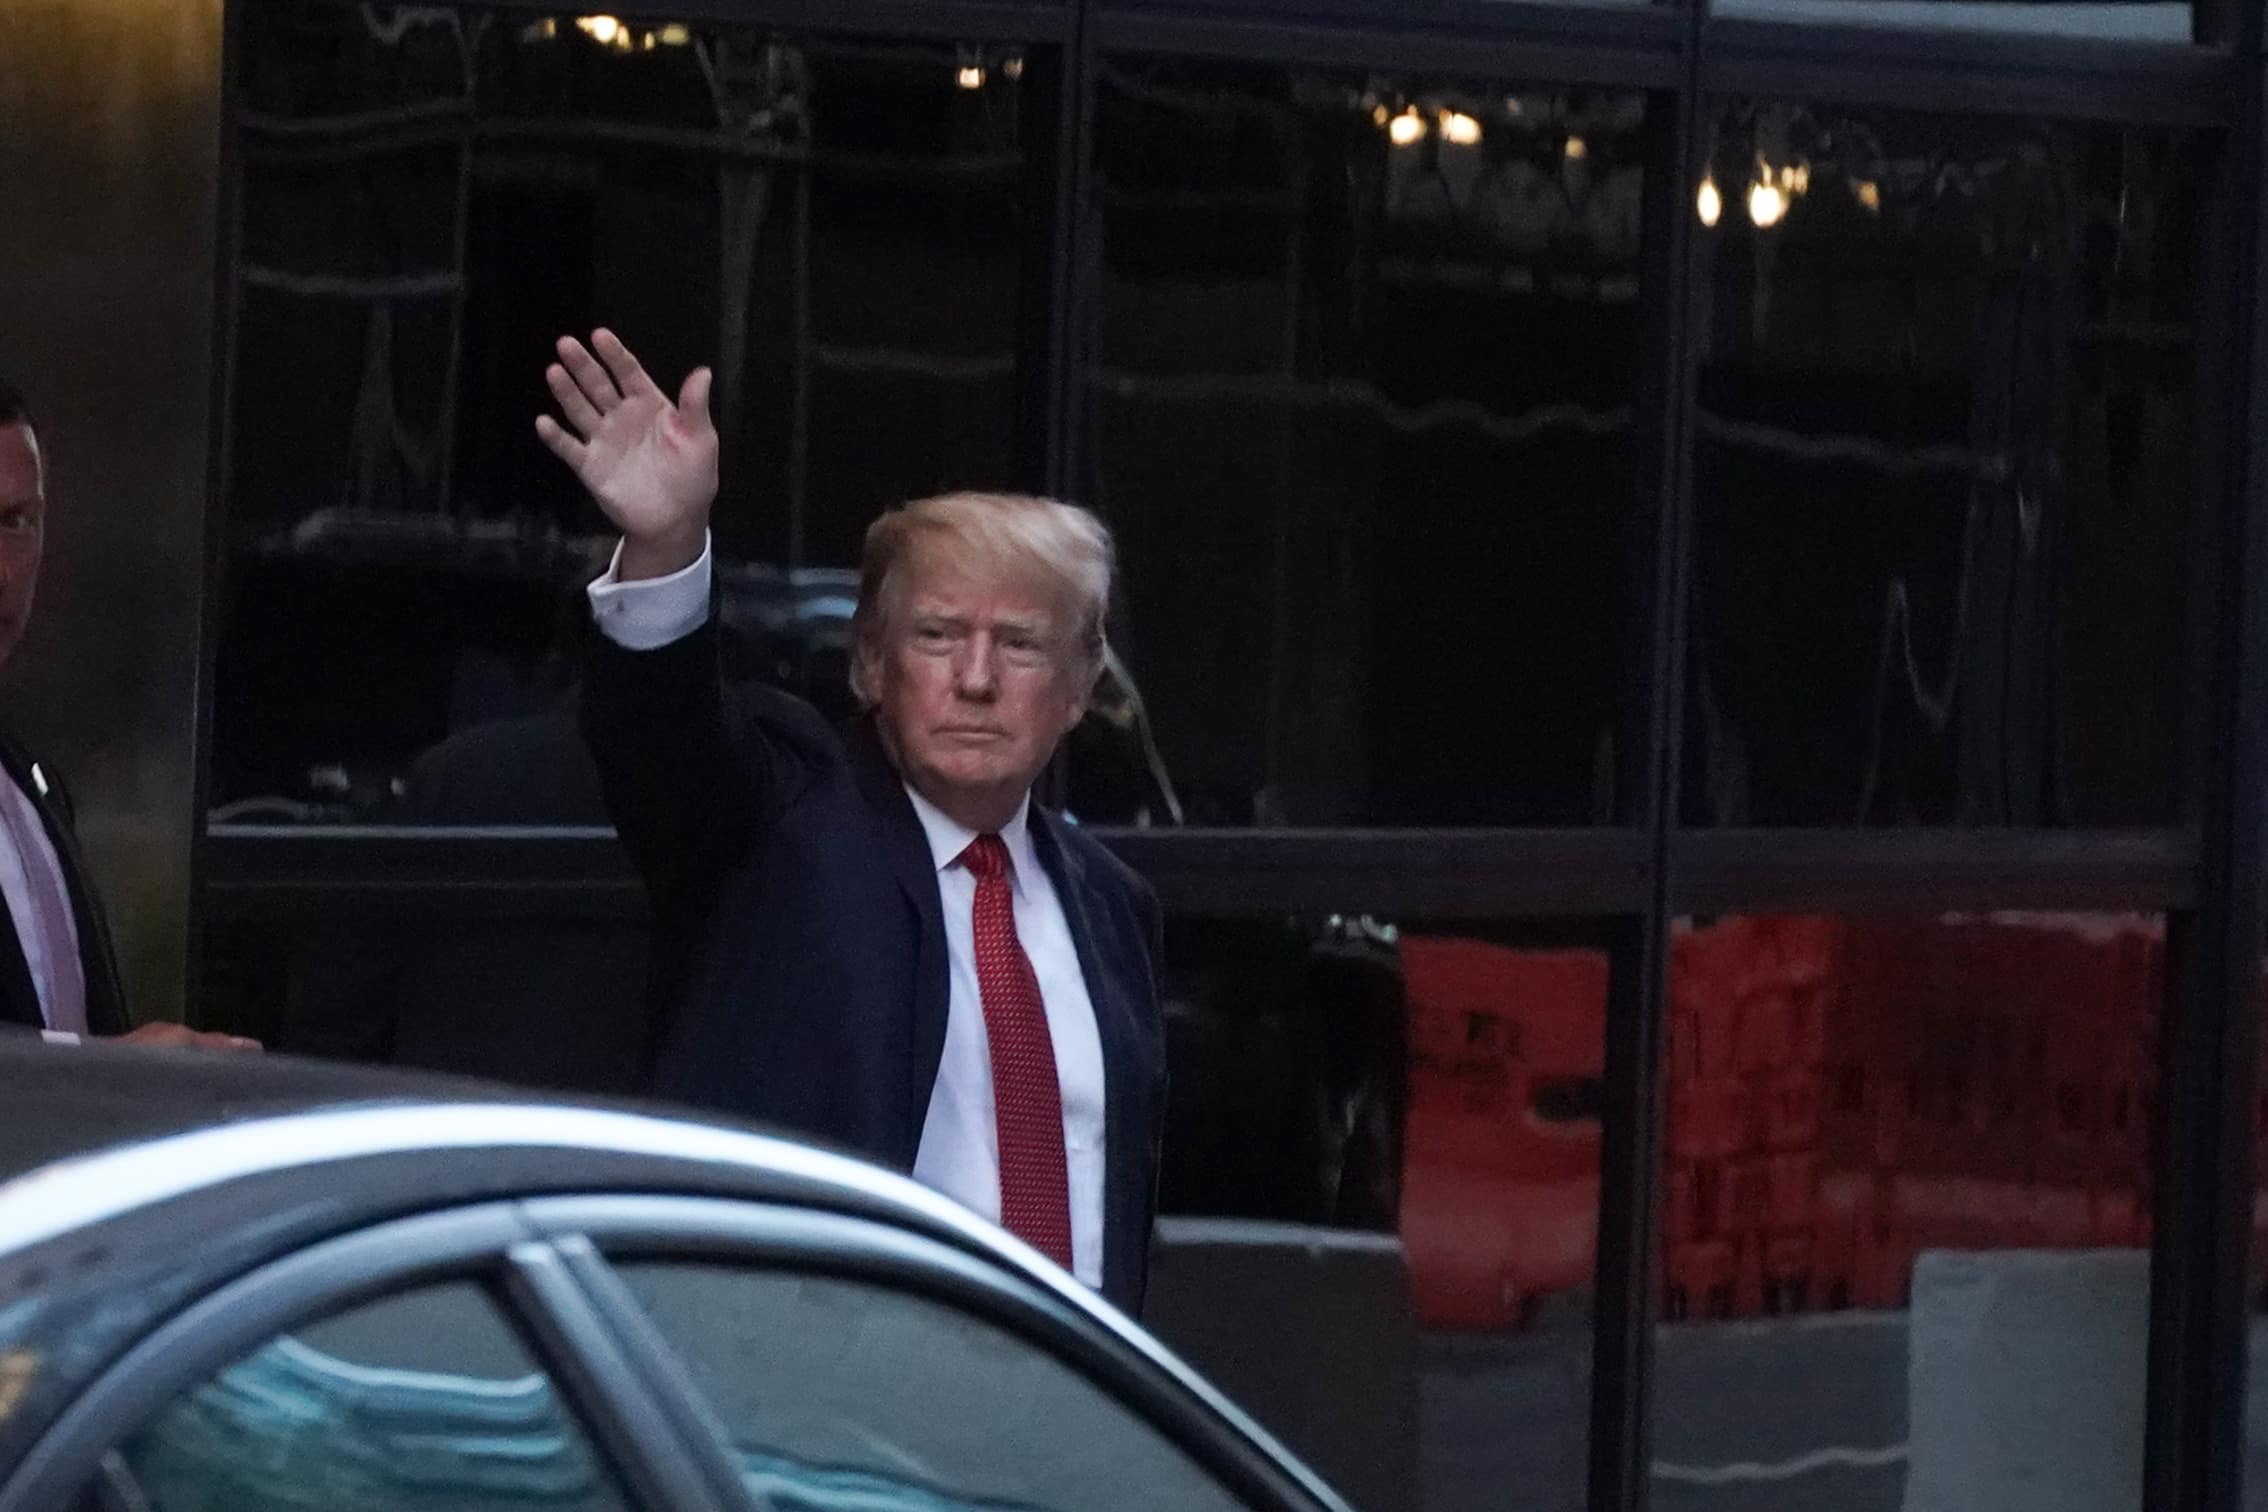 NEW YORK, NY - AUGUST 16: Former U.S. President Donald Trump leaves Trump Tower in Manhattan on August 16, 2021 in New York City.   (Photo by David Dee Delgado/Getty Images)